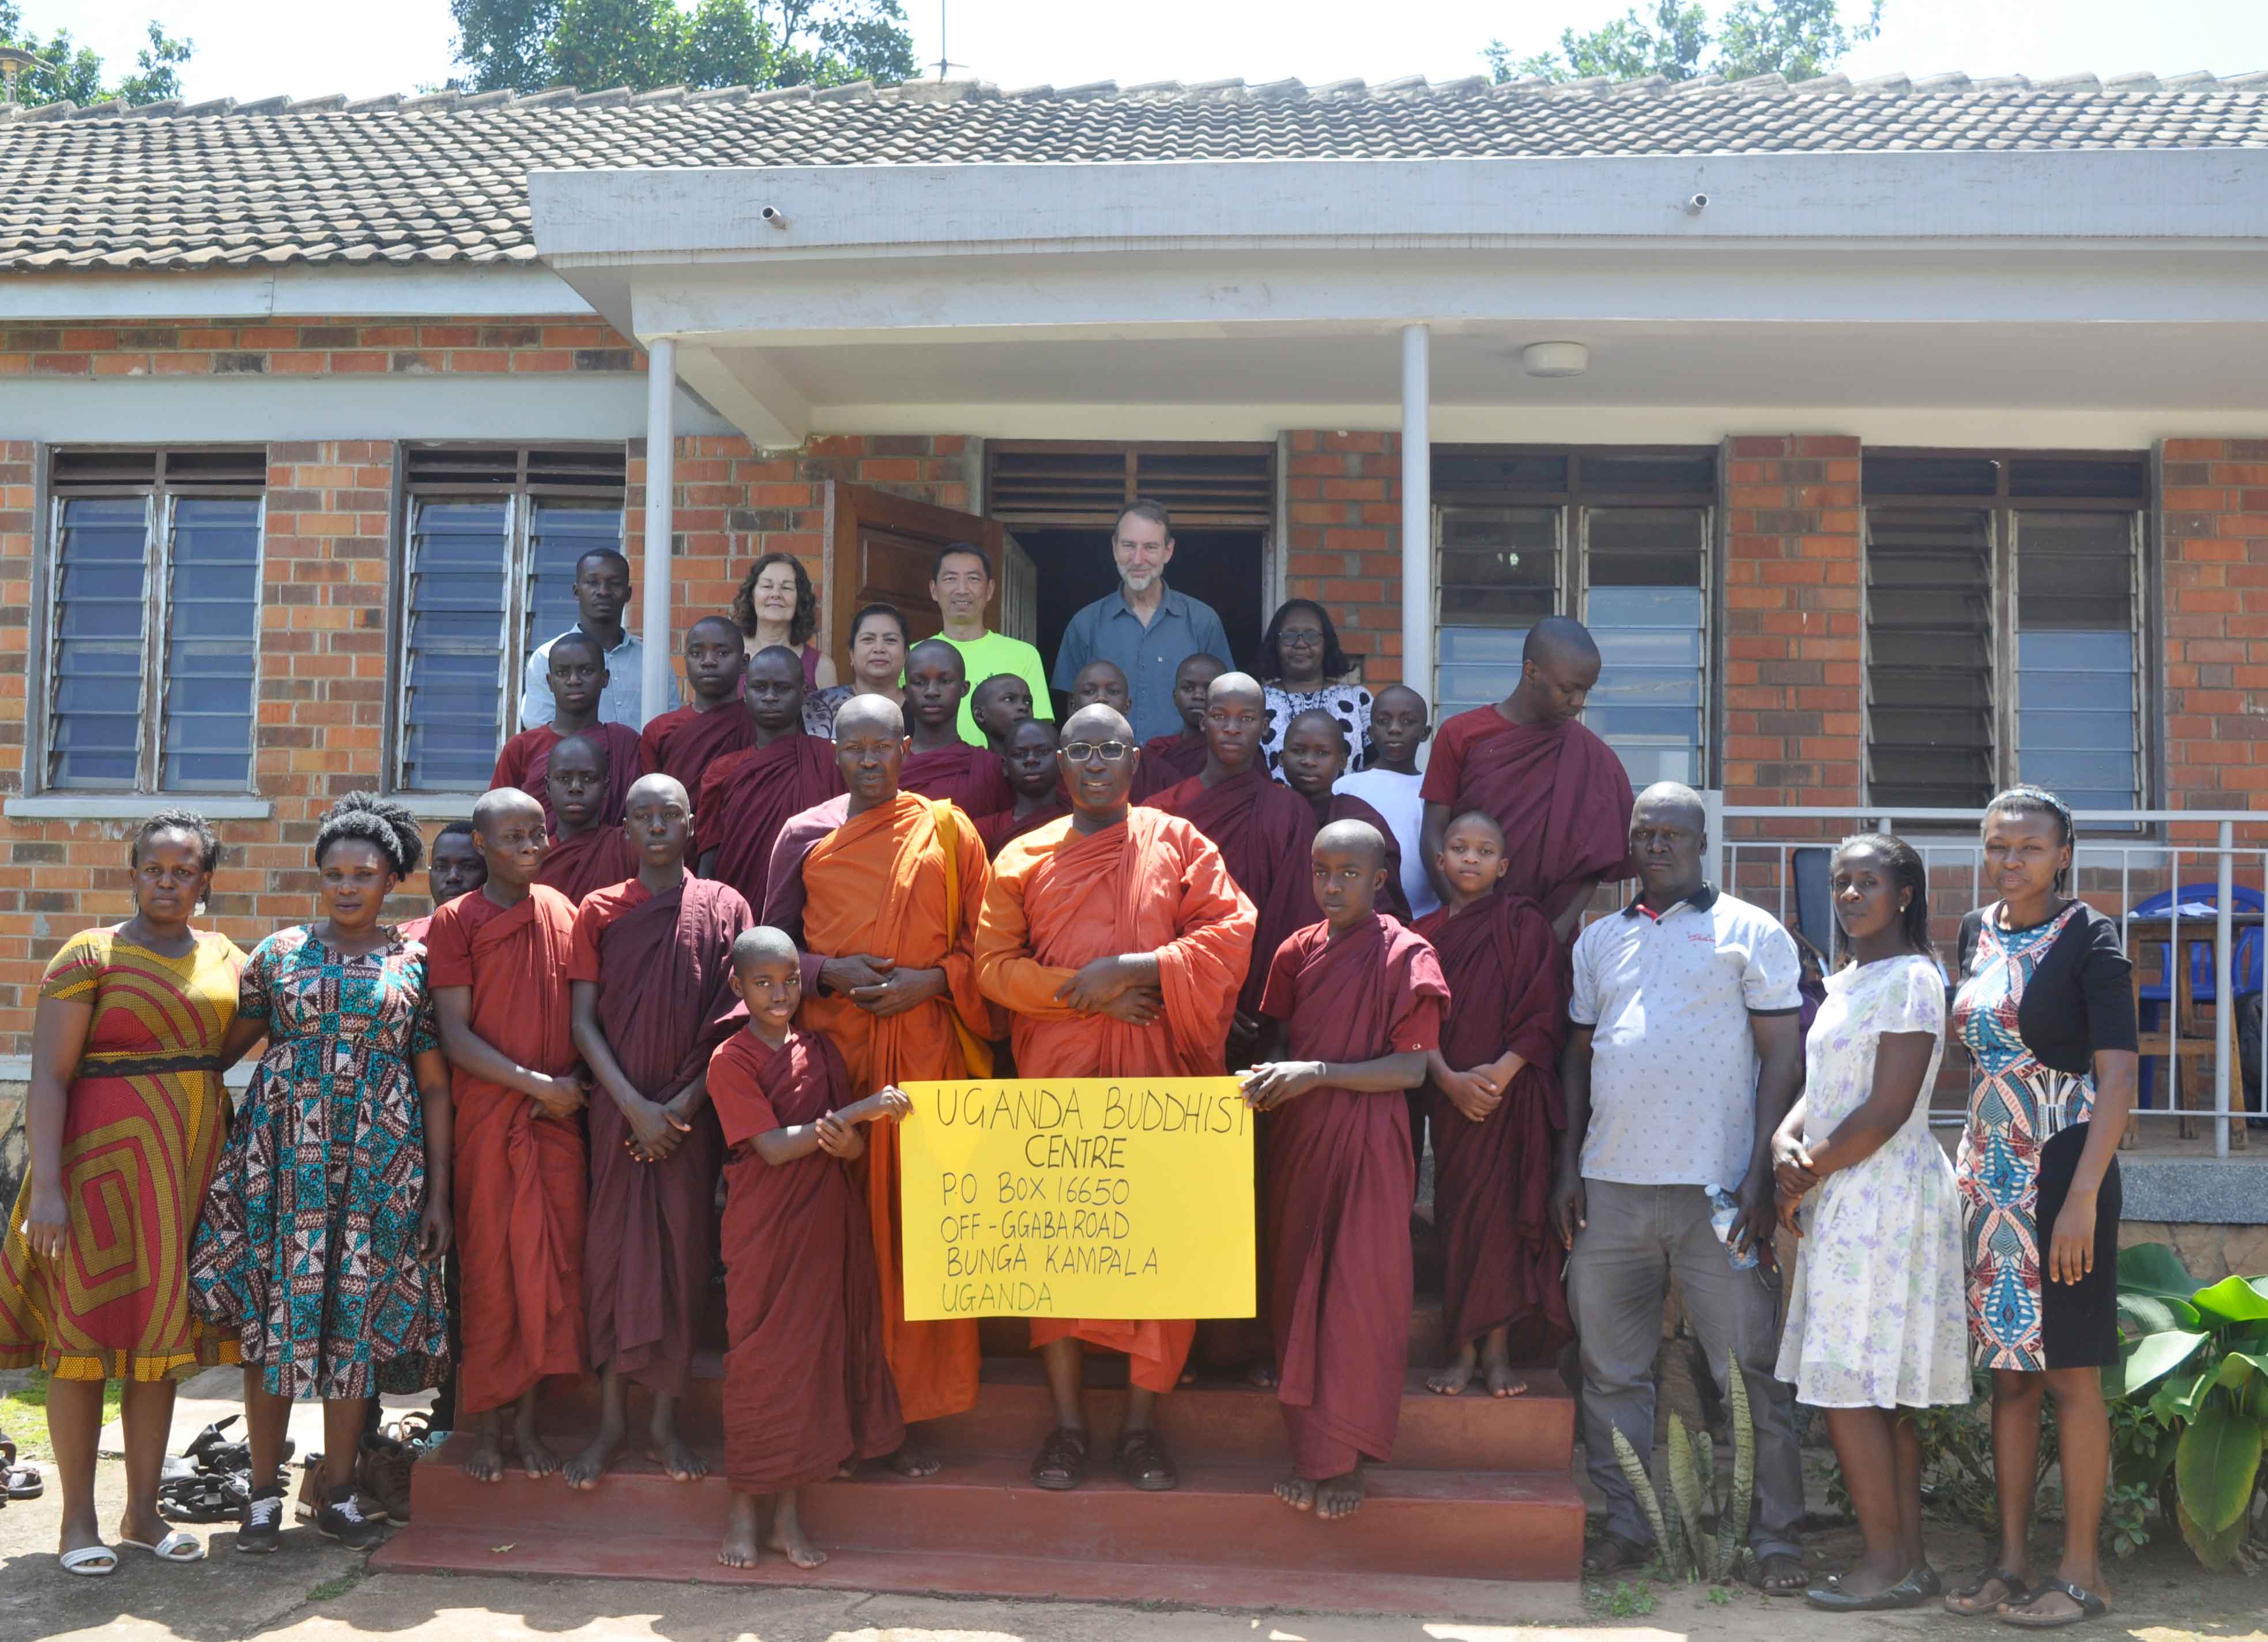 UBC’s  Kampala Branch: A Promising Start for Sharing Buddha’s Teachings and Practices